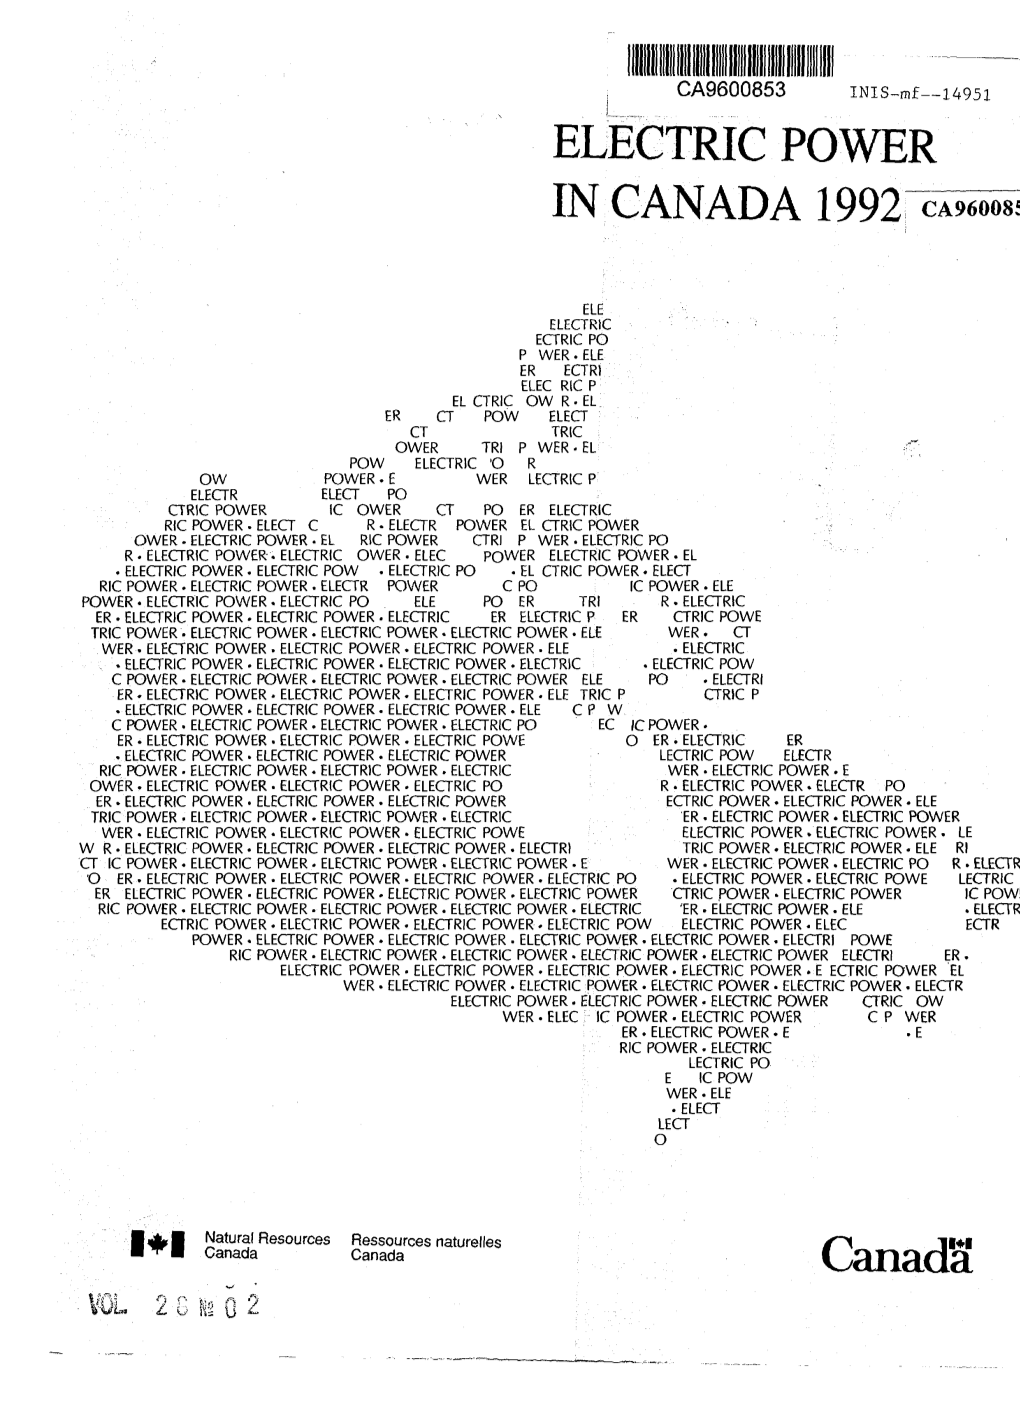 Electric Power in Canada 1992